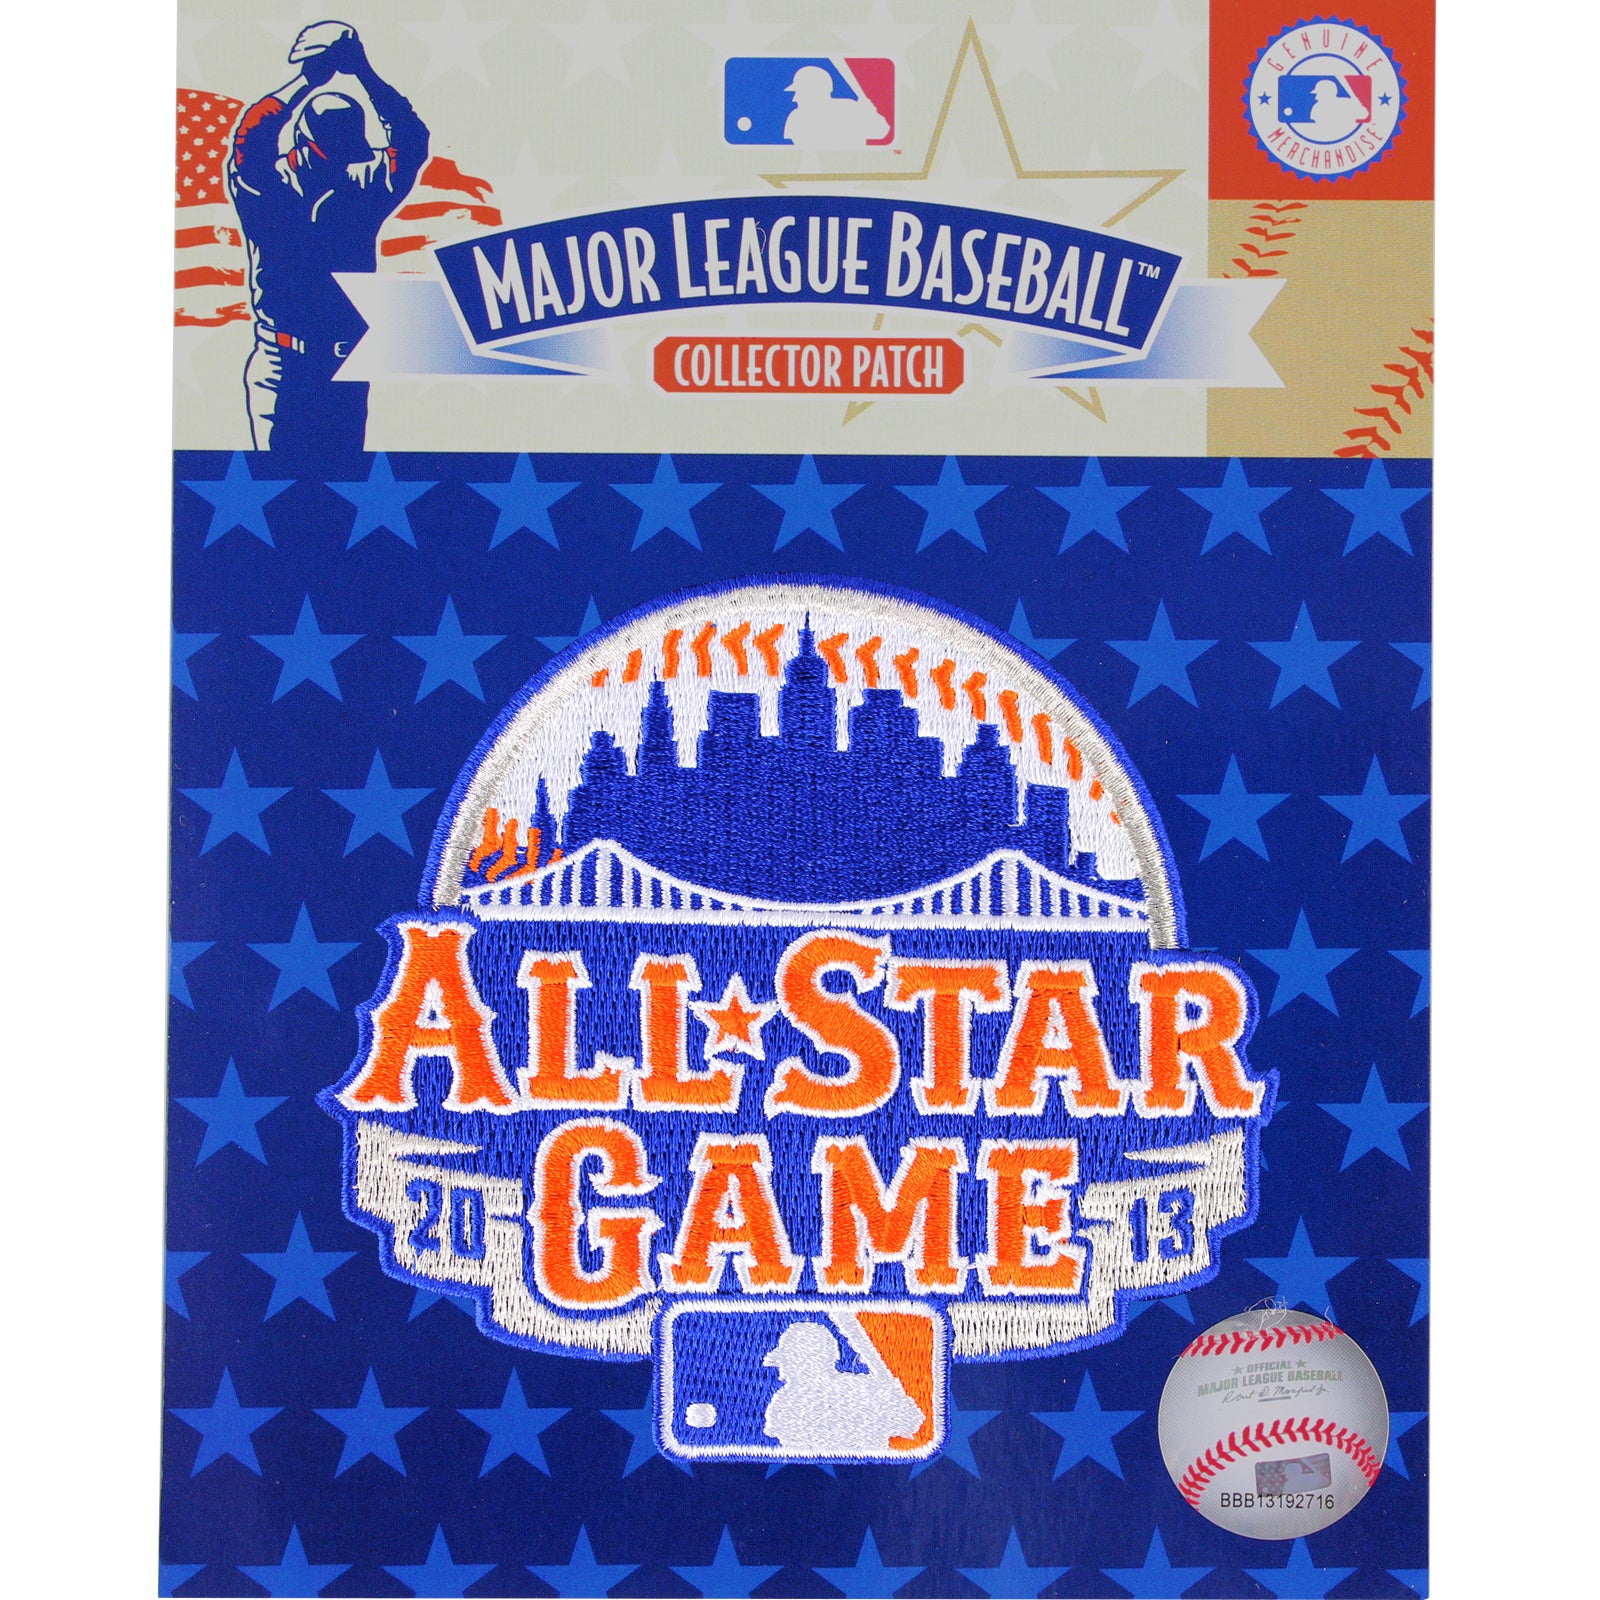 2013 mlb all star game jersey